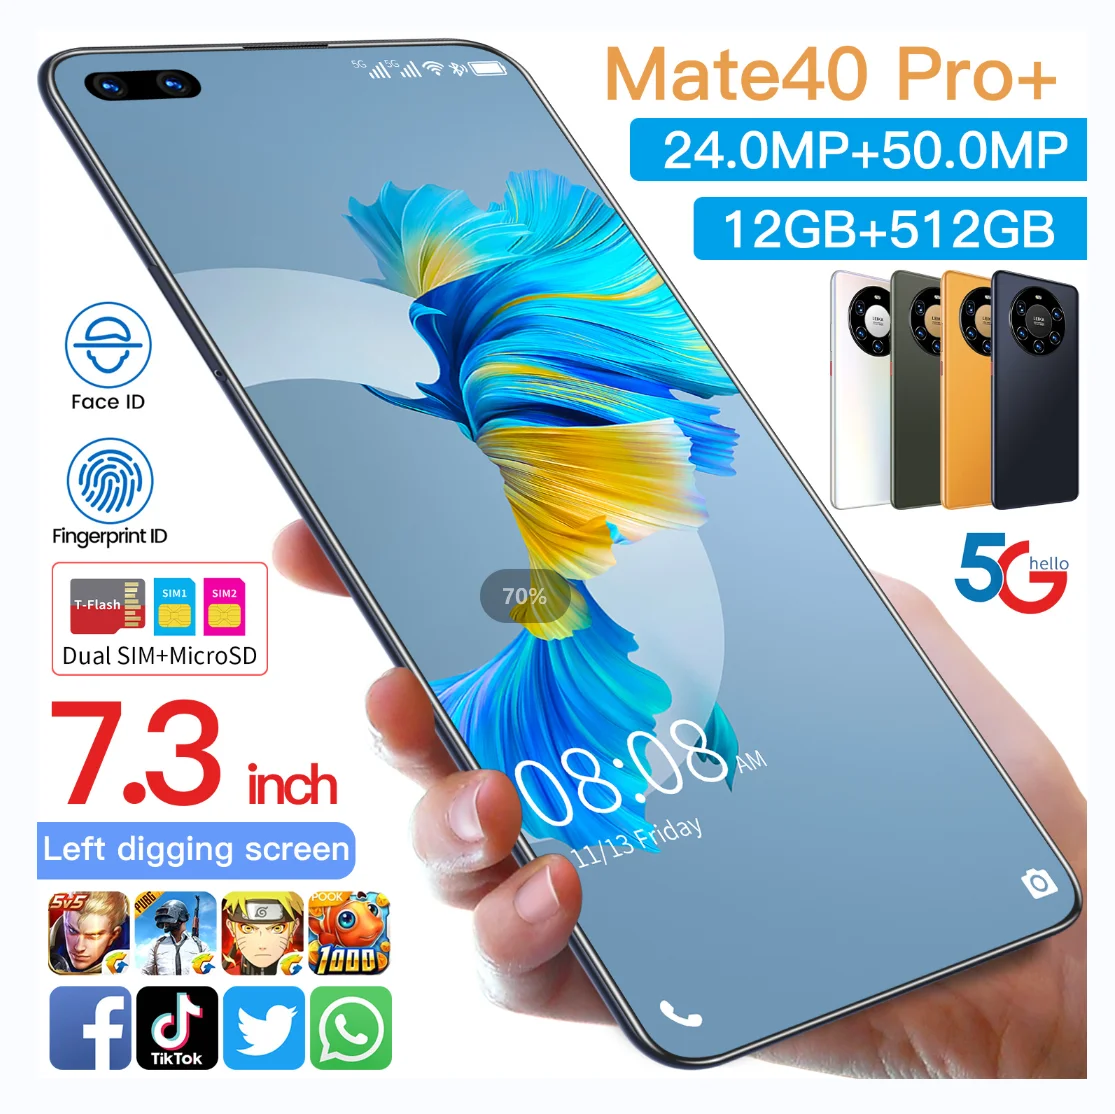 

Mate 40 Pro+ 12GB+512GB 7.3 Inch Global Version Support Dual SIM Card Android Smartphone Mobile Phones, Black white yellow green